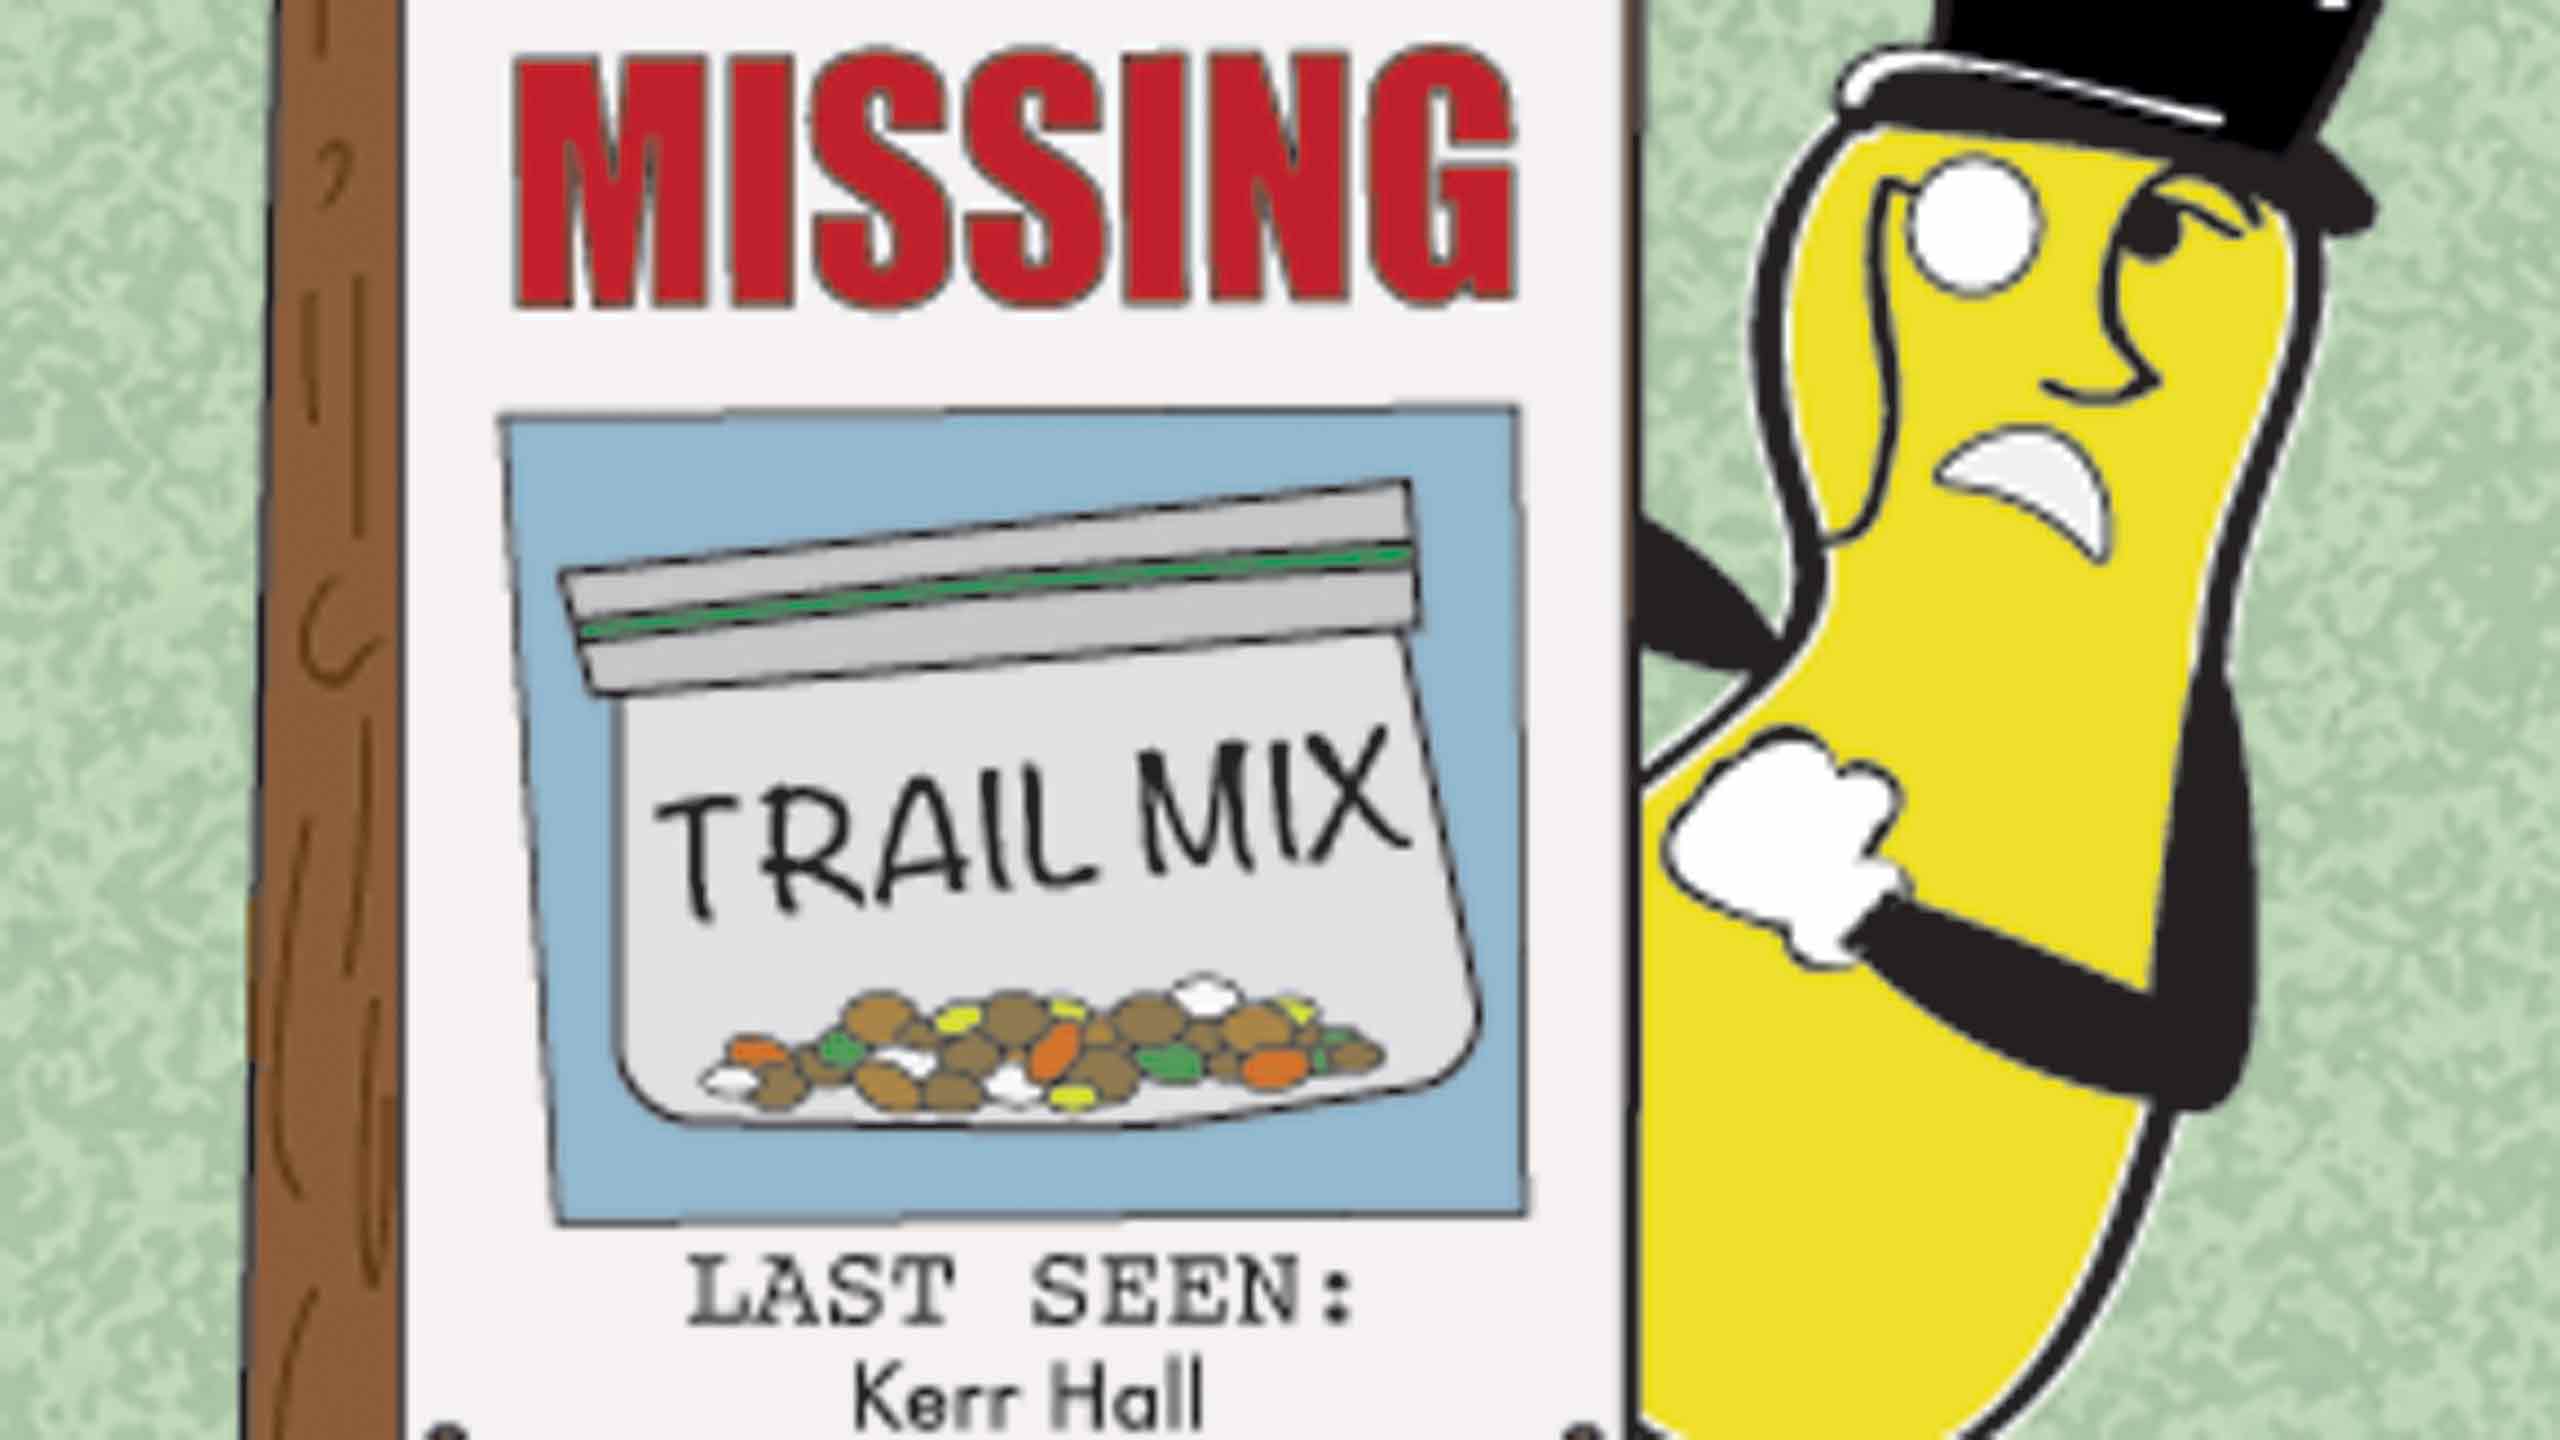 A Mr. Peanut stands behind a "missing" sign looking for the trailmix